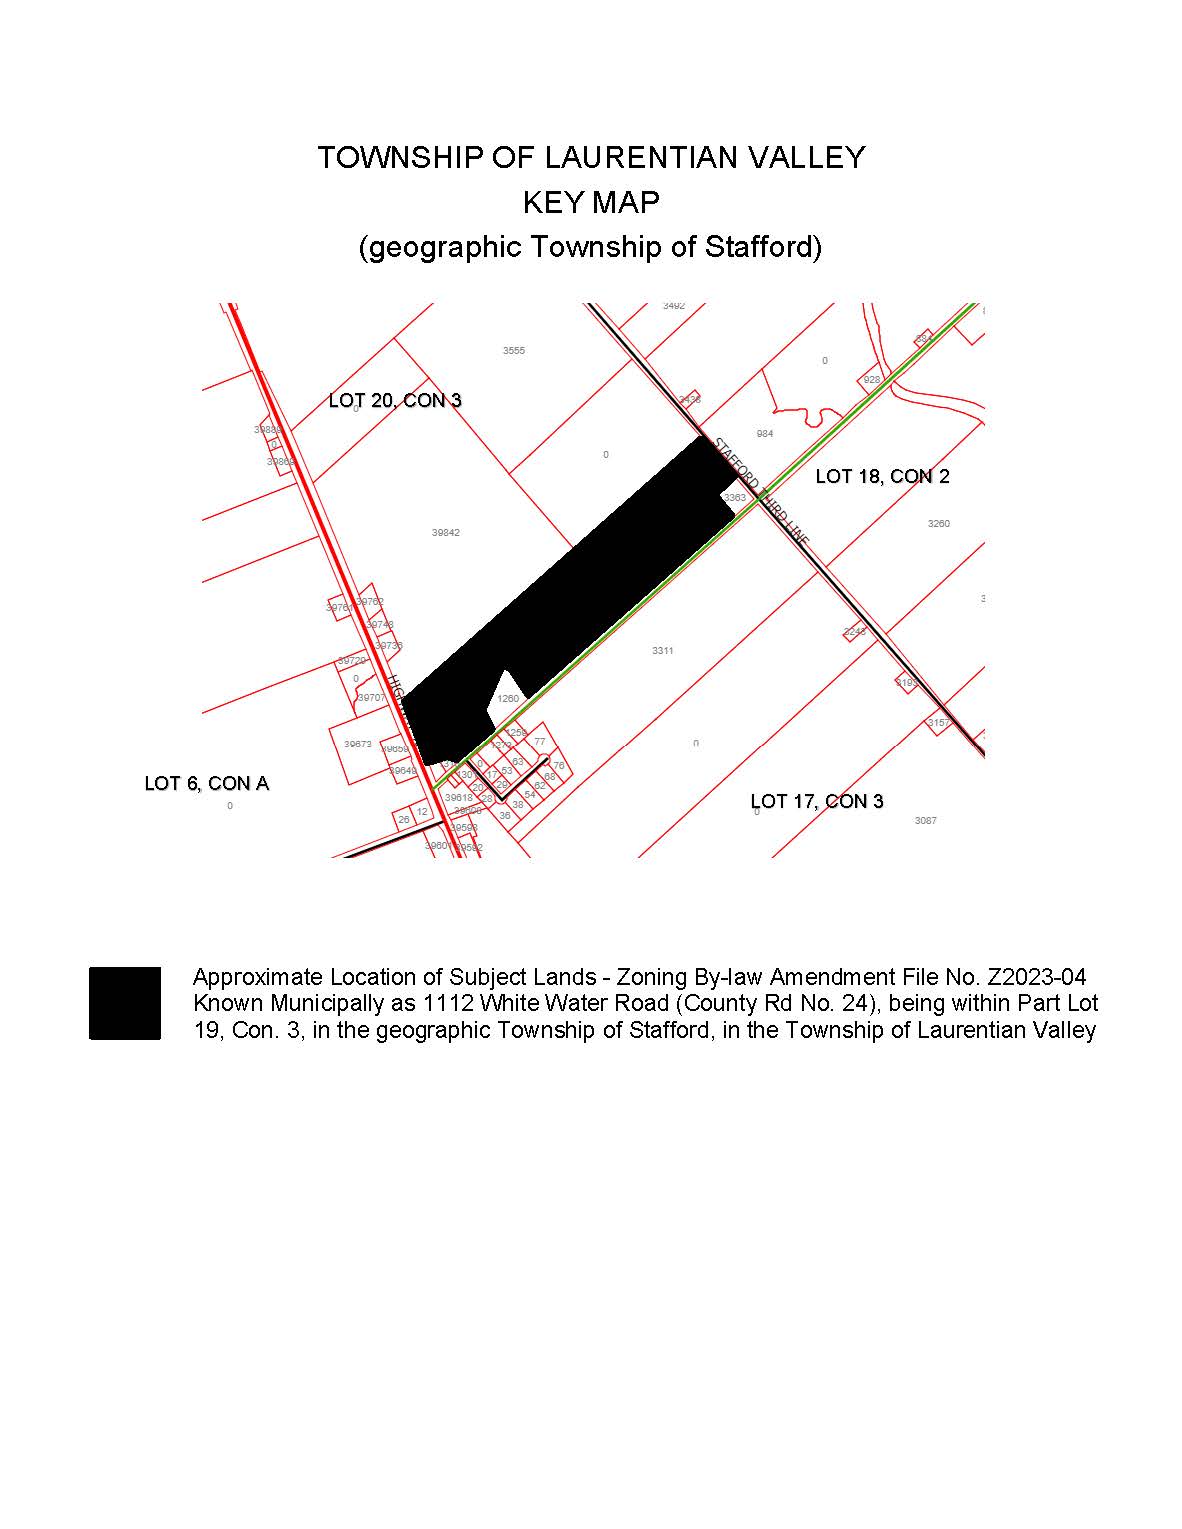 Image of key map showing subject property for file Z2023 04.